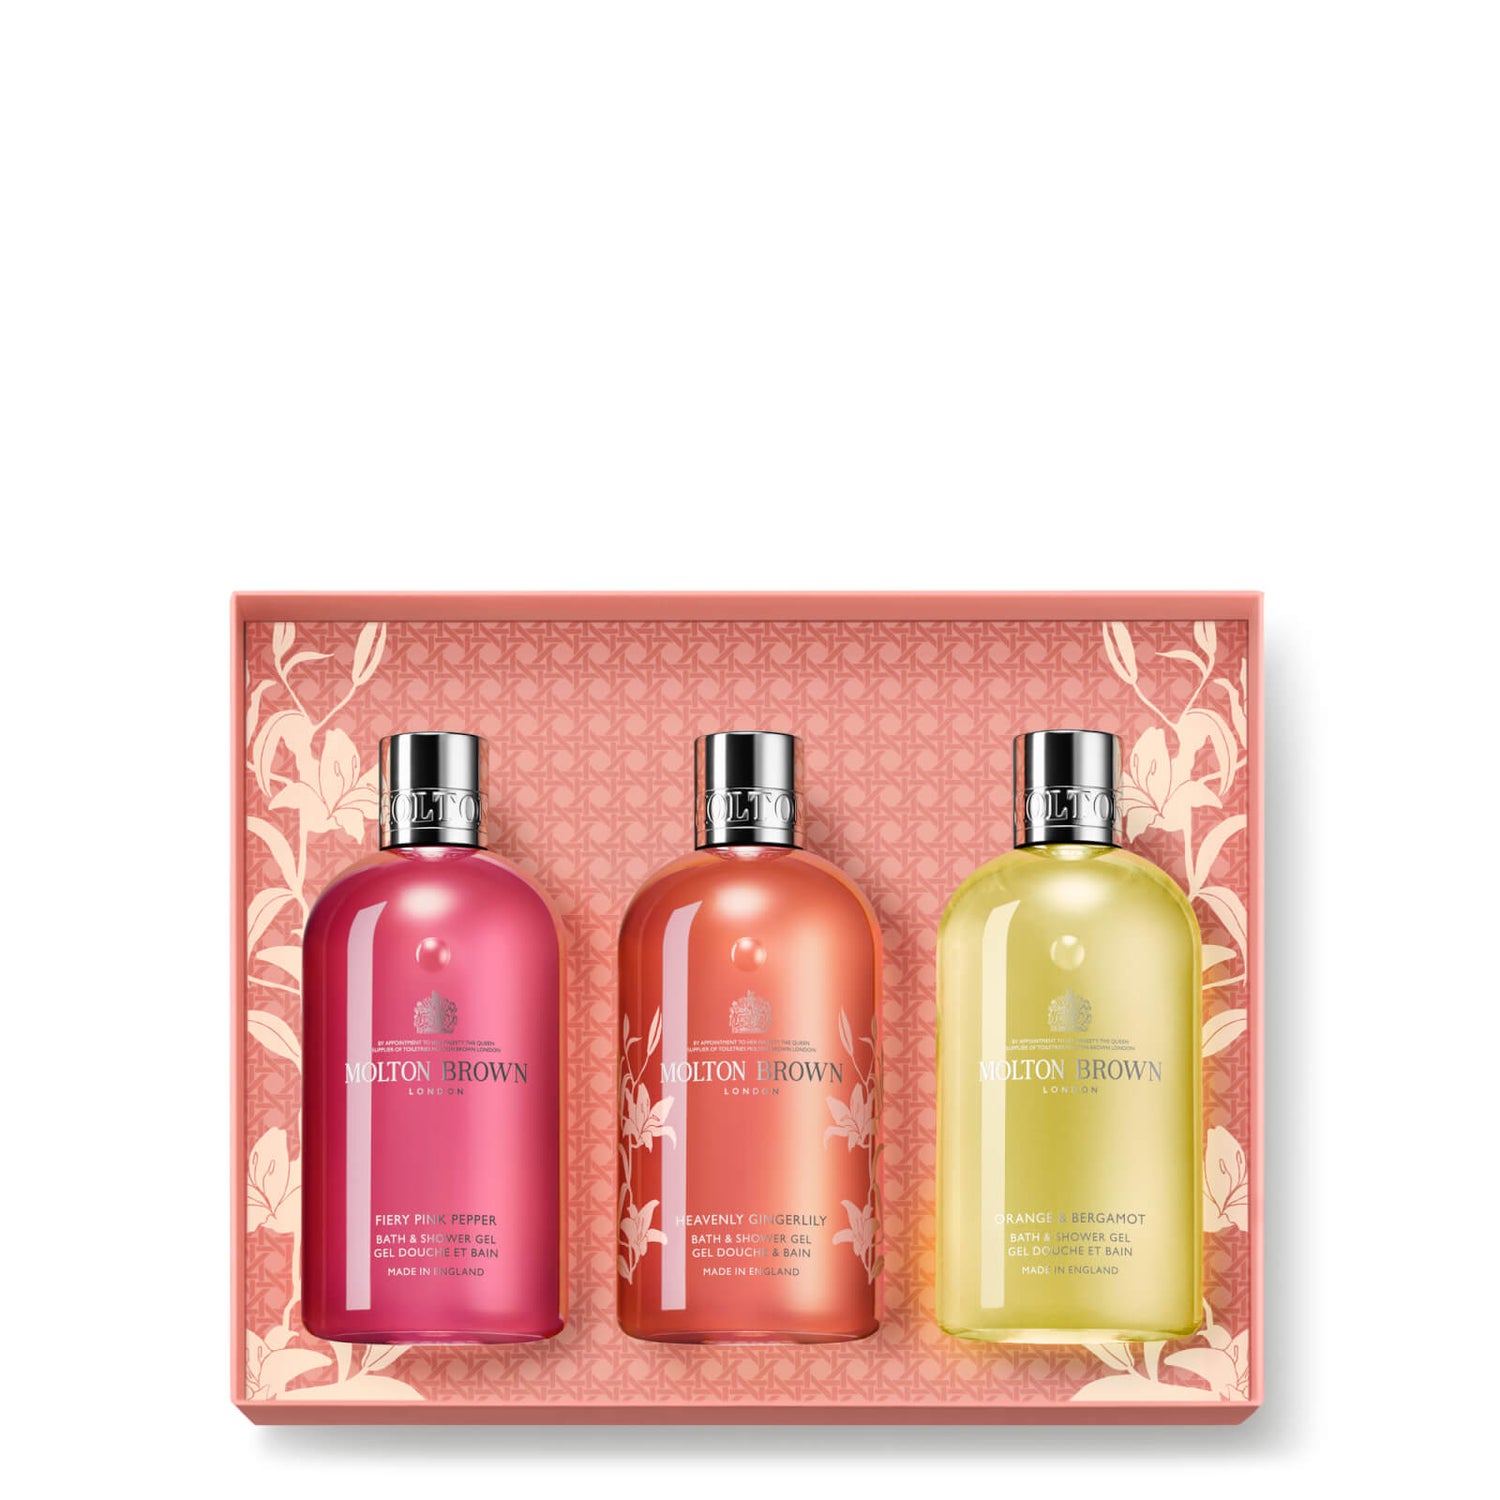 Molton Brown Floral and Citrus Body Care Gift Set